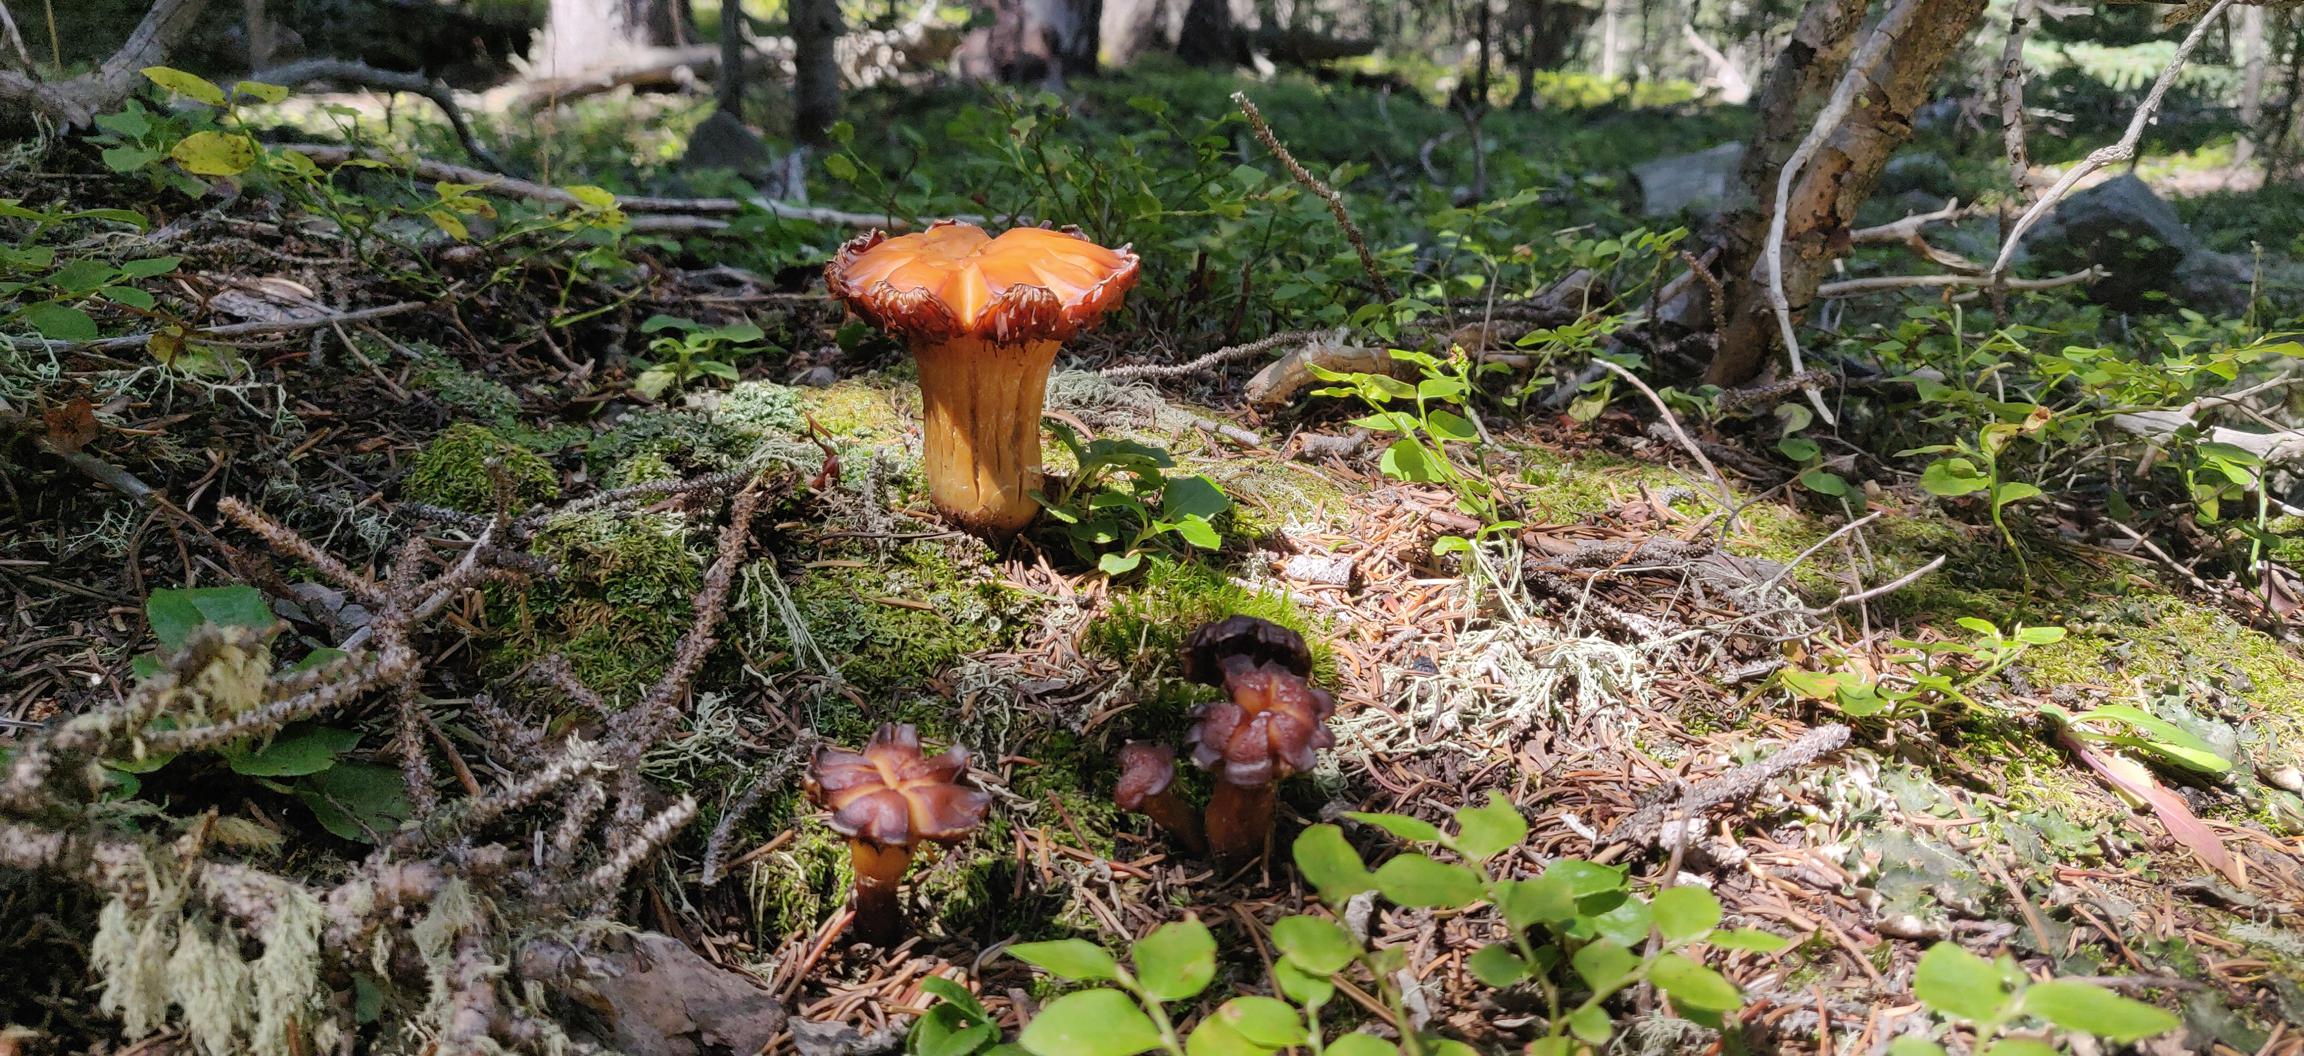 Some areas were fairly lush with TONS of really cool fungi